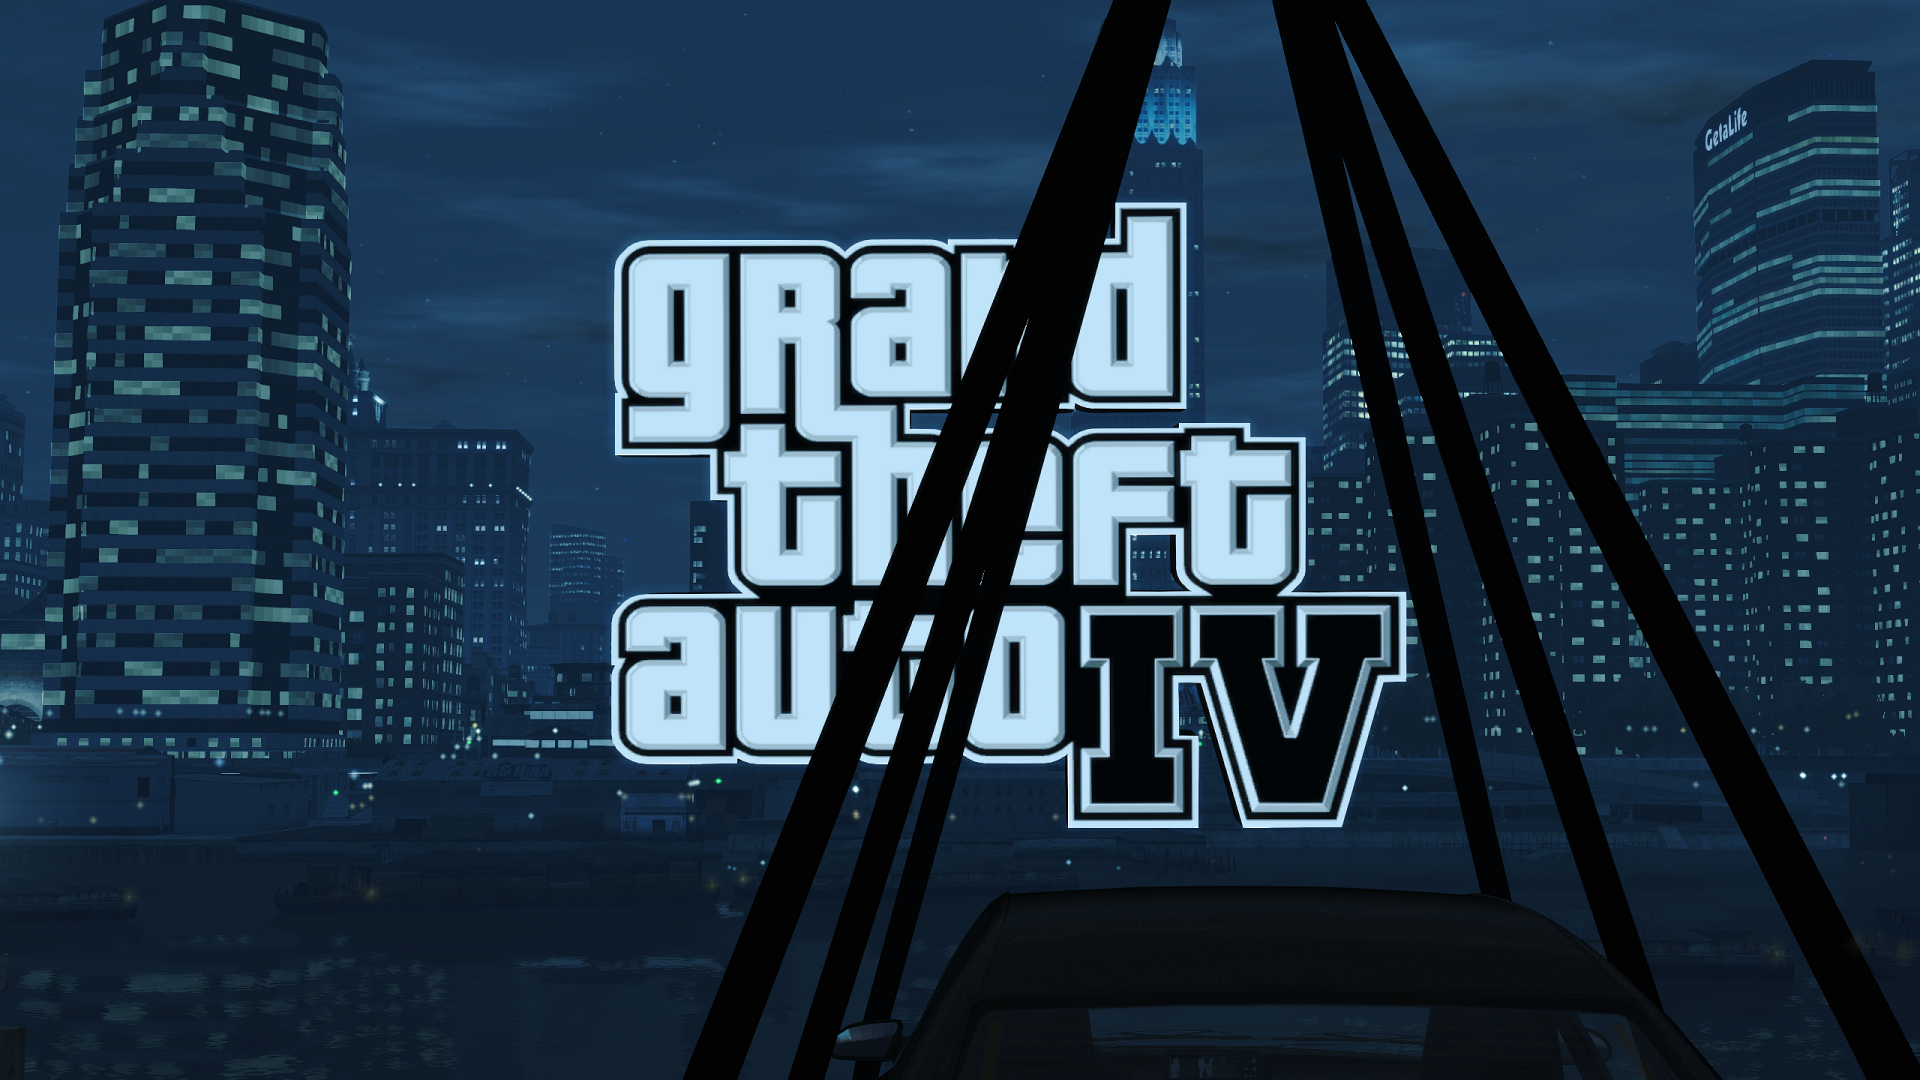 GTAIV 2023-02-05 17-30-02.png